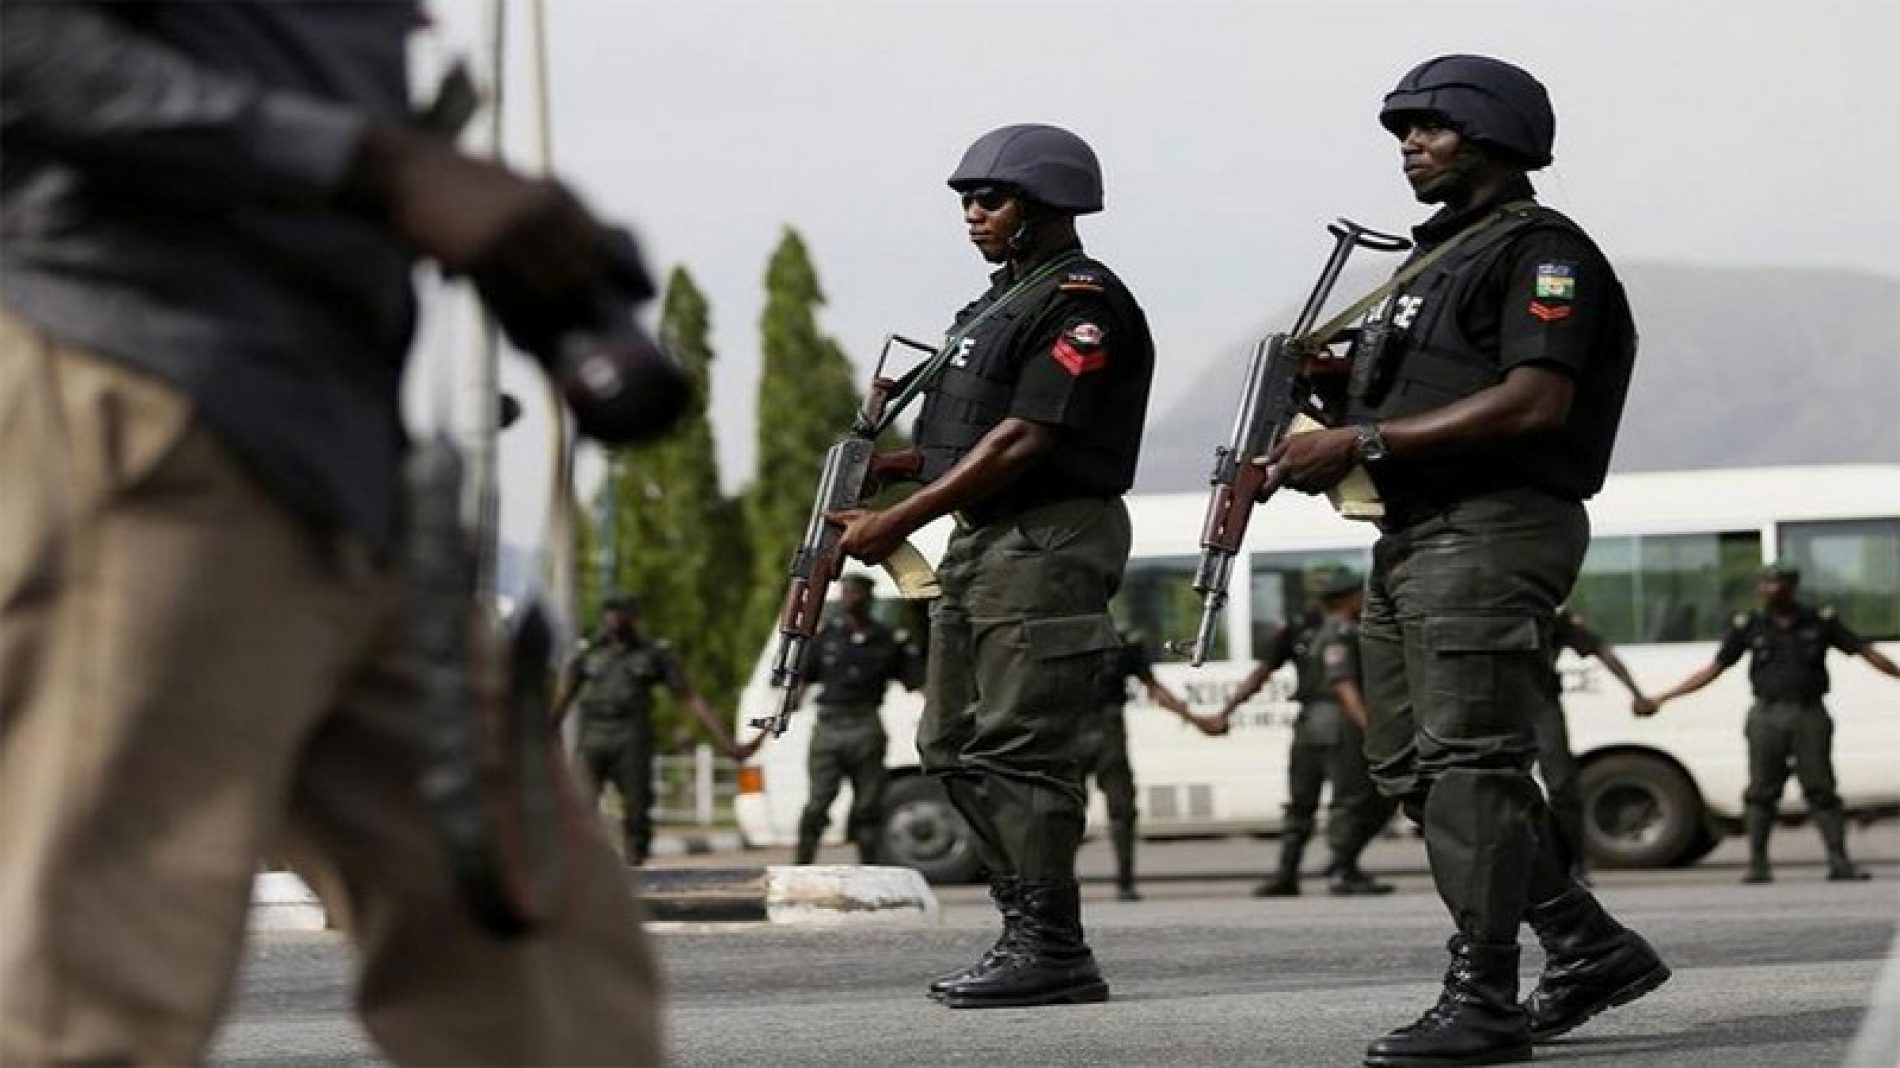 Kito Alert: The Nigerian Police Is On the Prowl